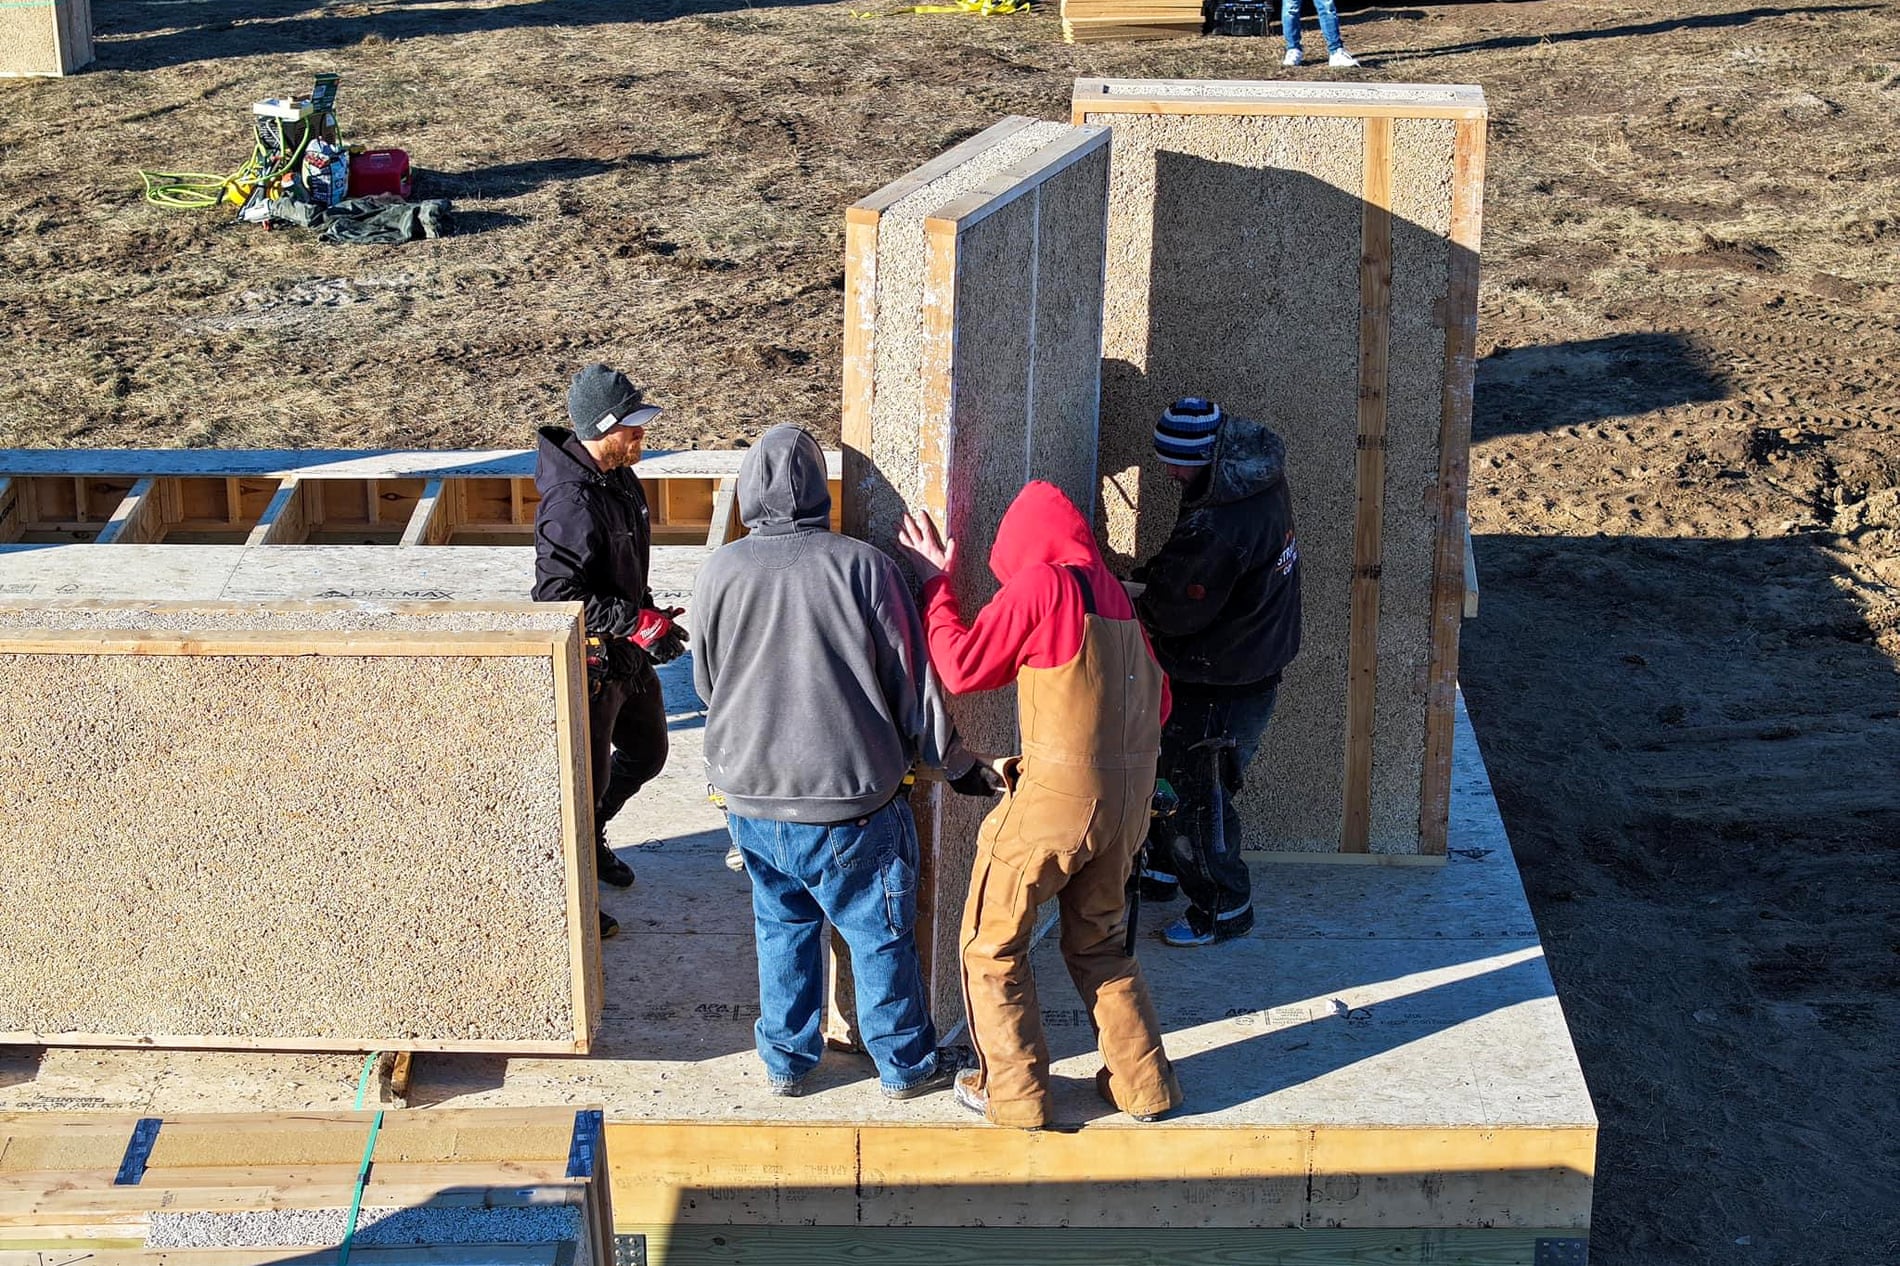 The Lower Sioux construction crew placing a prefabricated hempcrete wall panel, which weighs approximately 700lb. Photograph: Lower Sioux Industrial Hemp Project